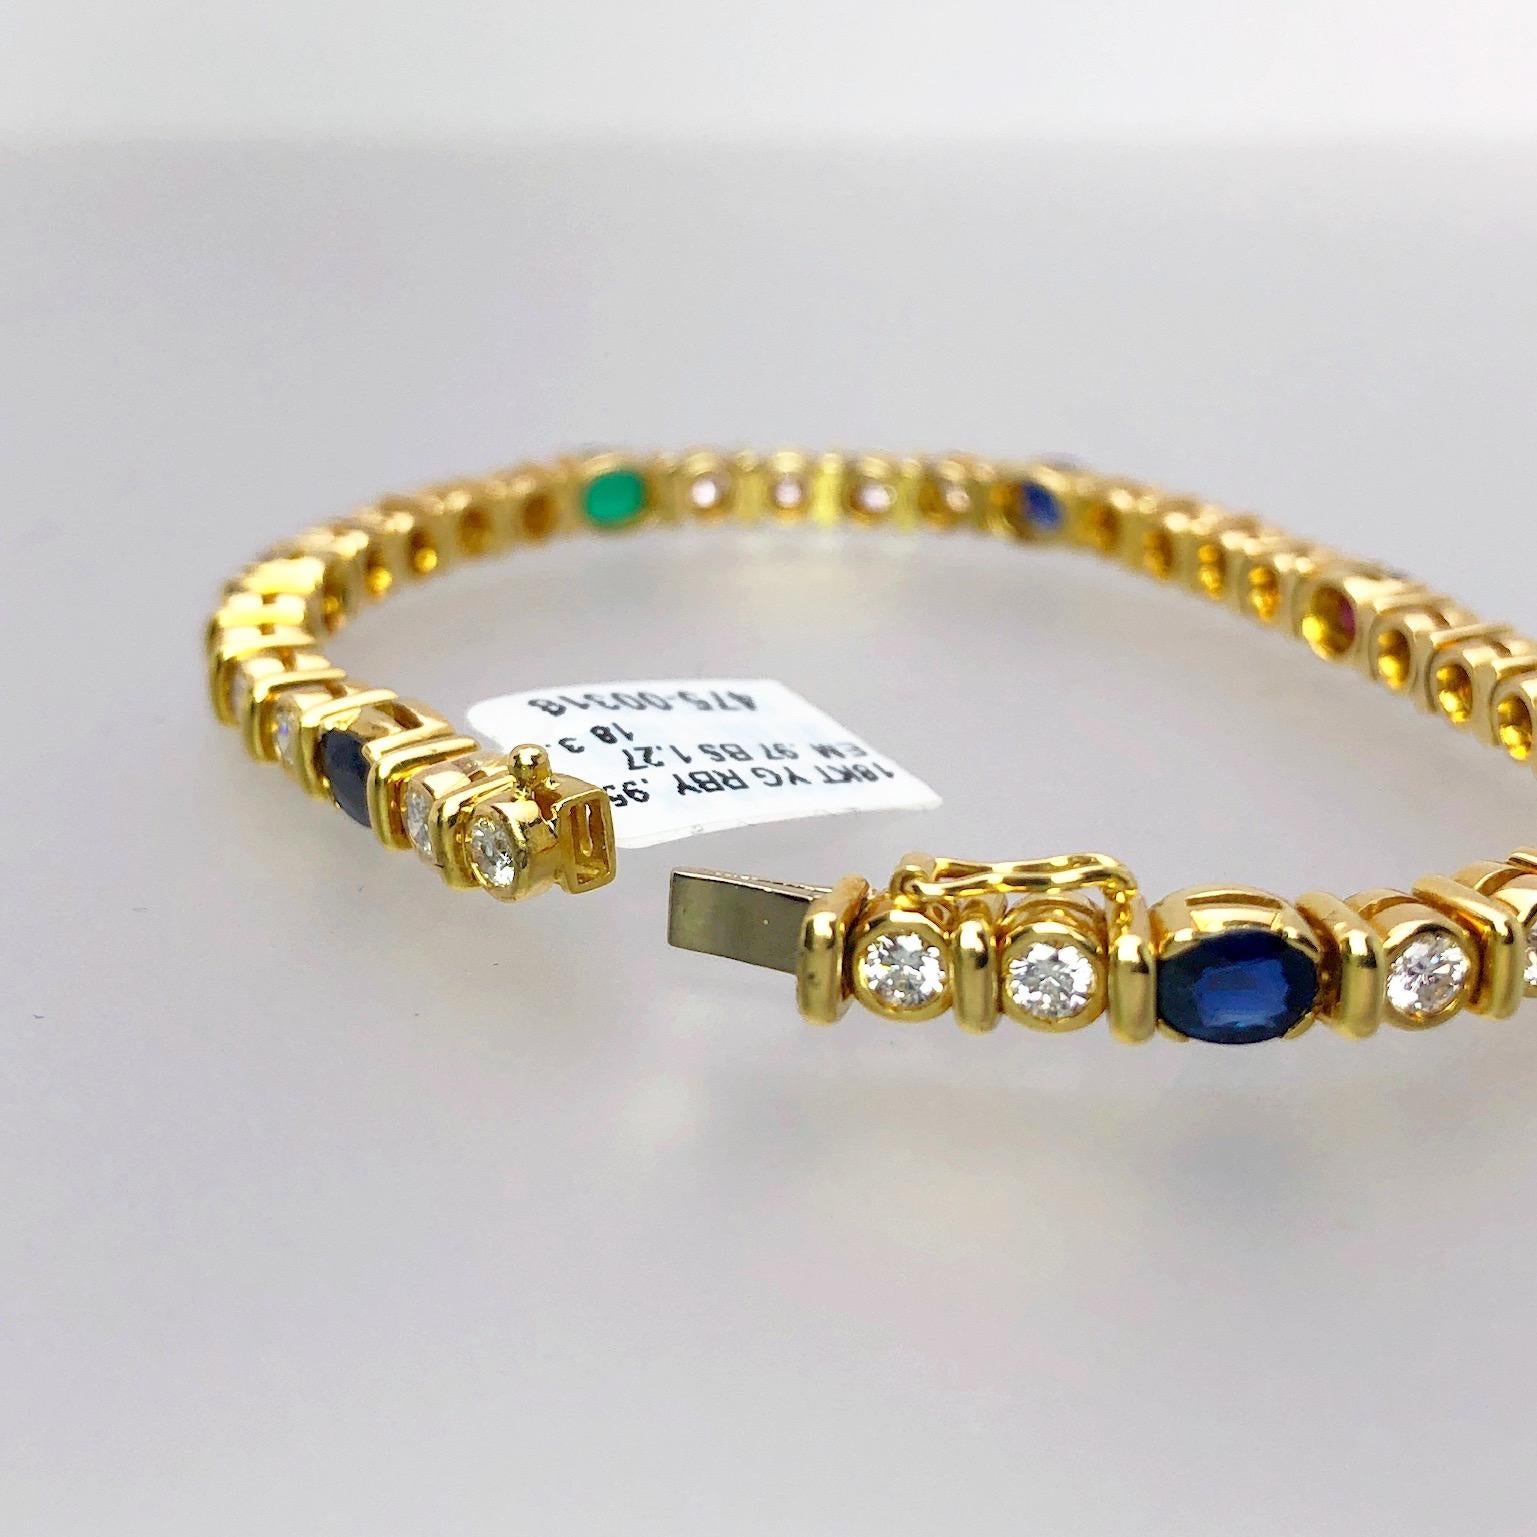 Women's or Men's Barzizza 18KT Yellow Gold Bracelet with Diamonds, Rubies, Emeralds and Sapphires For Sale